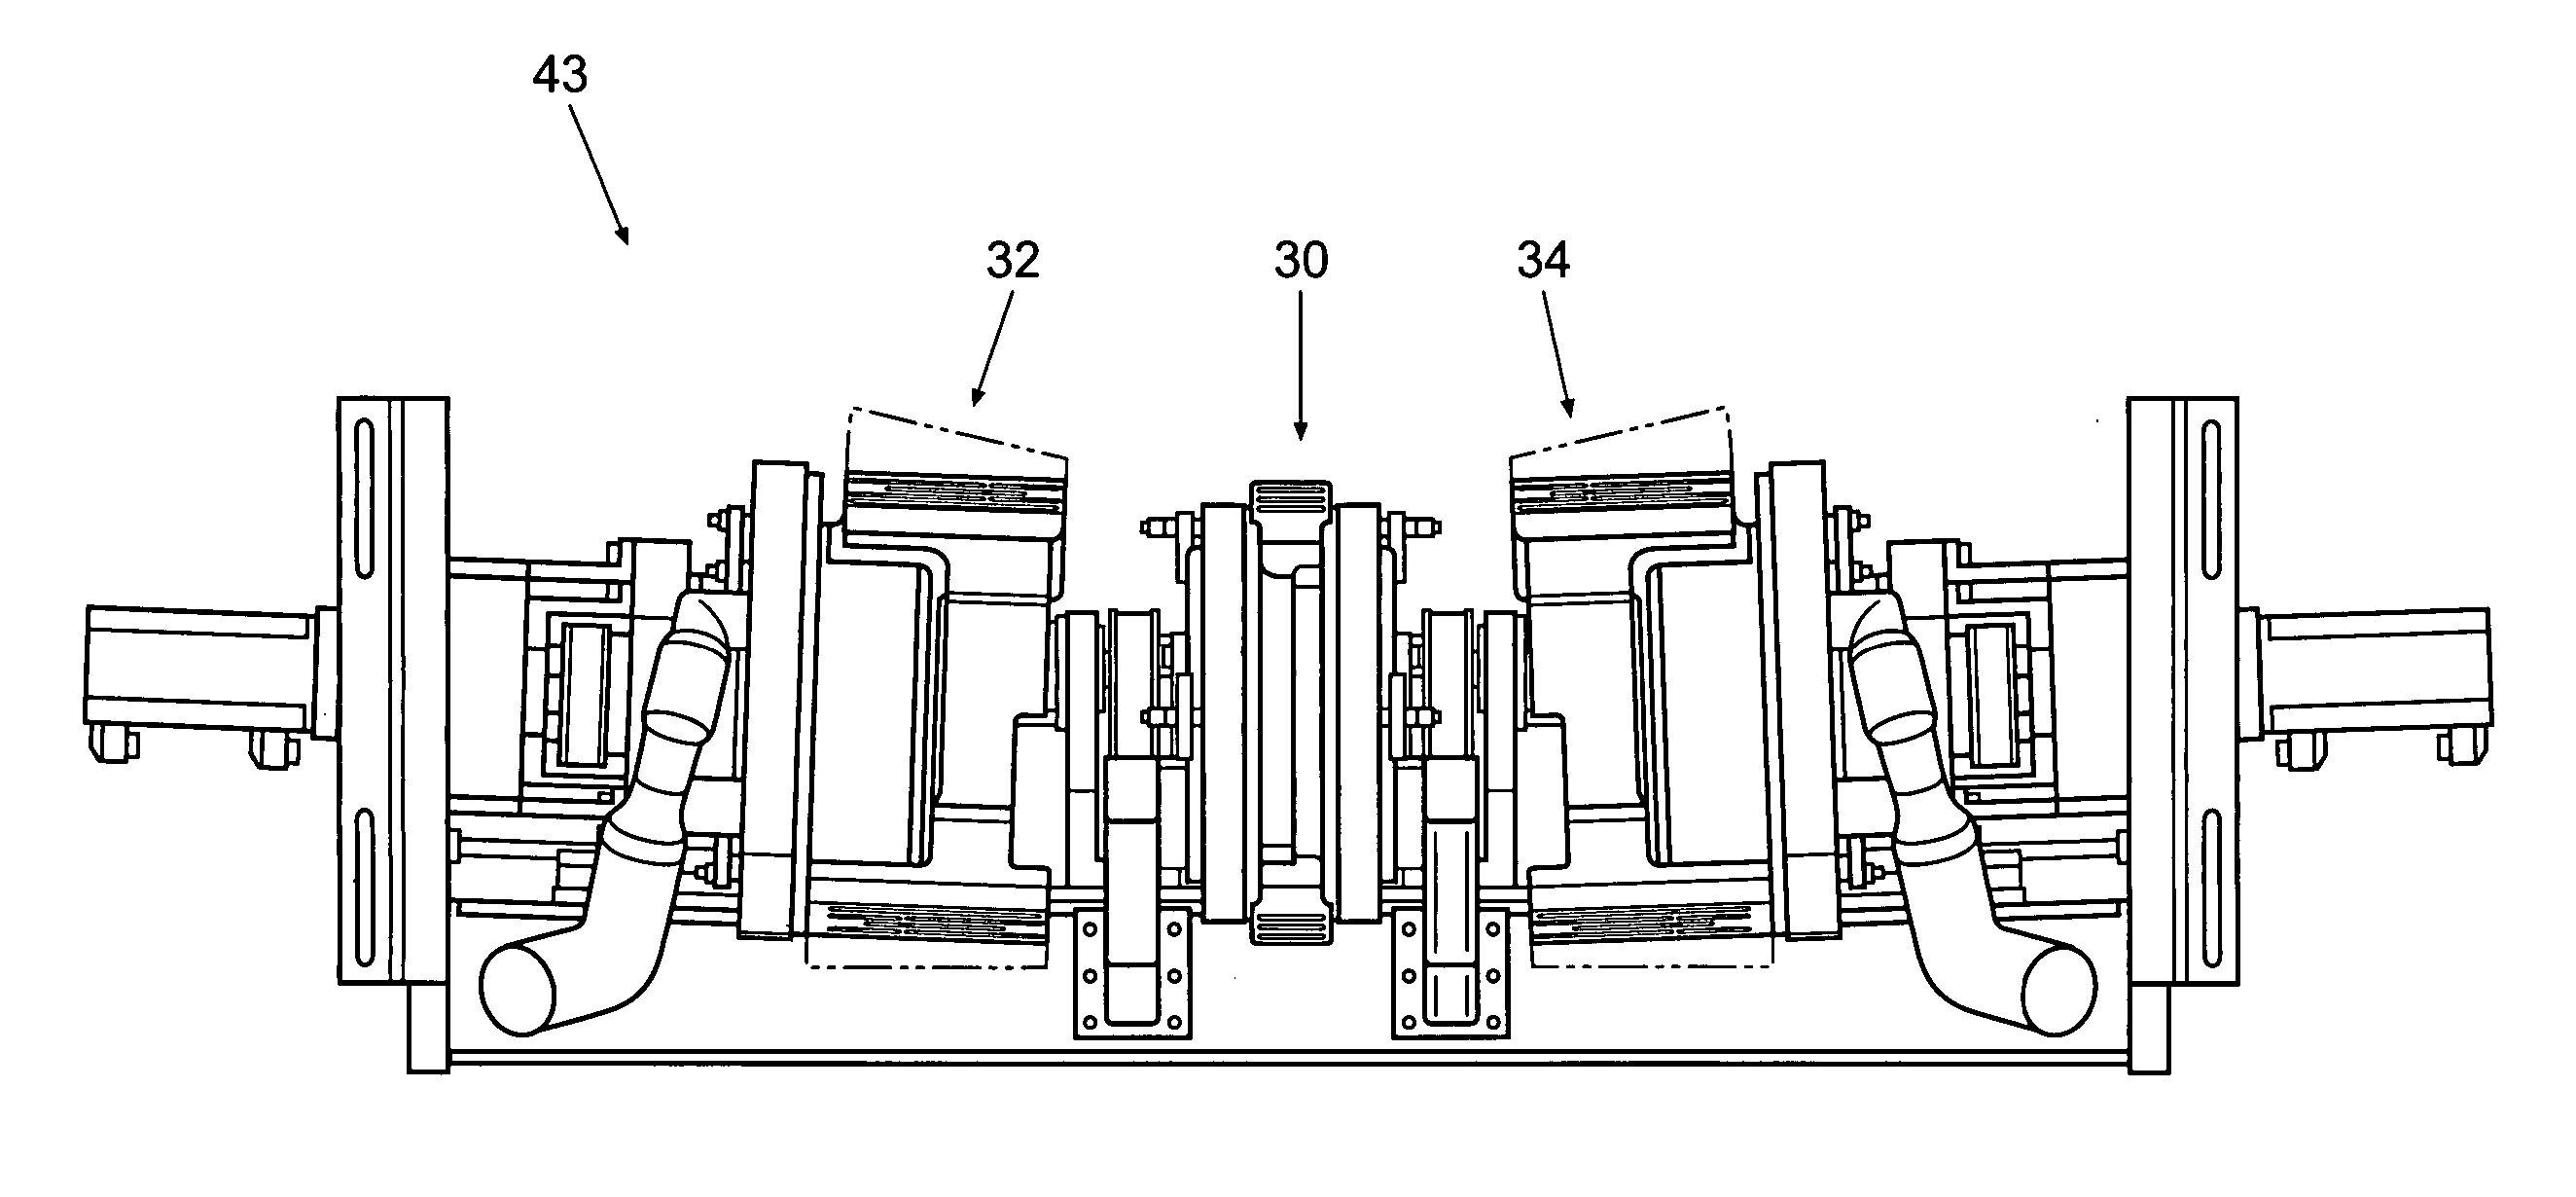 Article transfer and placement apparatus